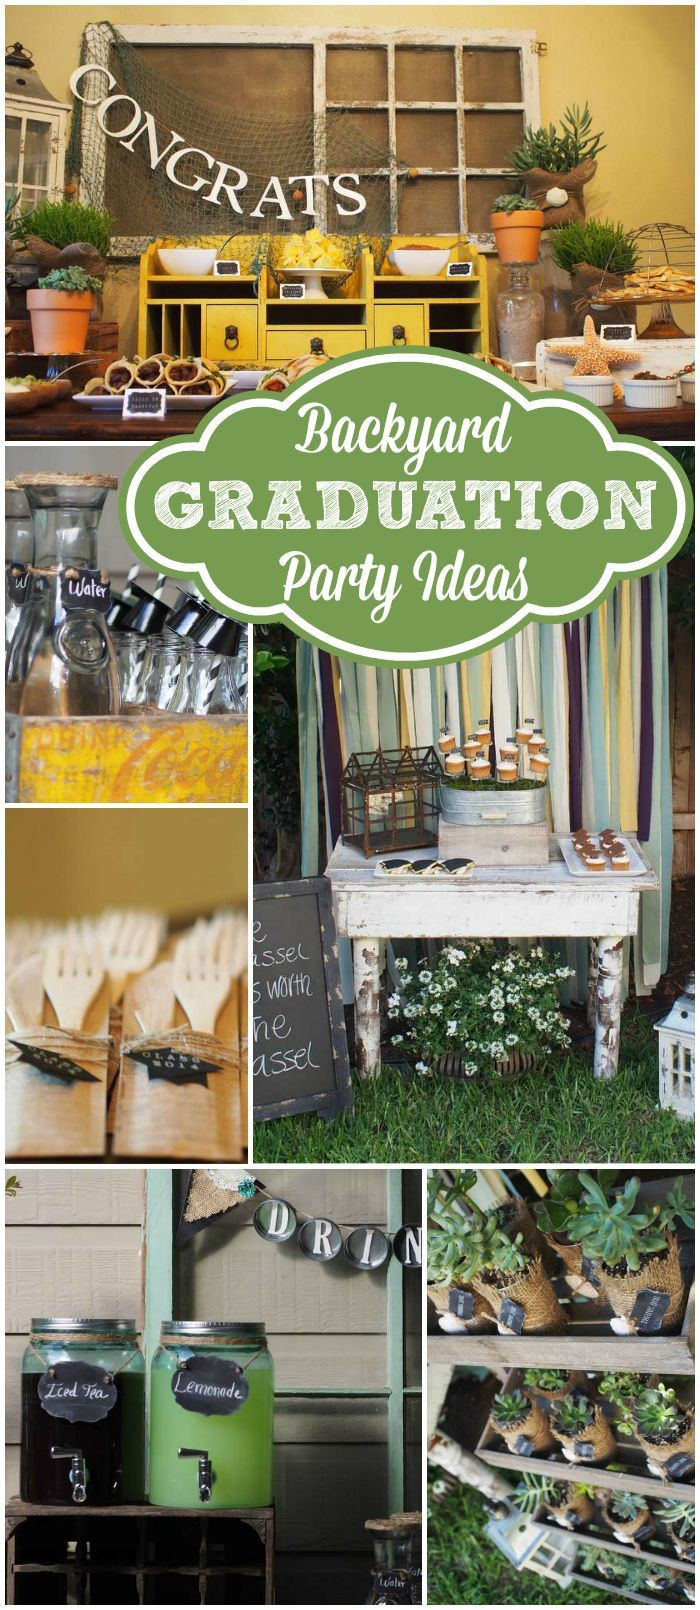 Pinterest Backyard Graduation Party Ideas
 Here s a trendy masculine outdoor graduation party See